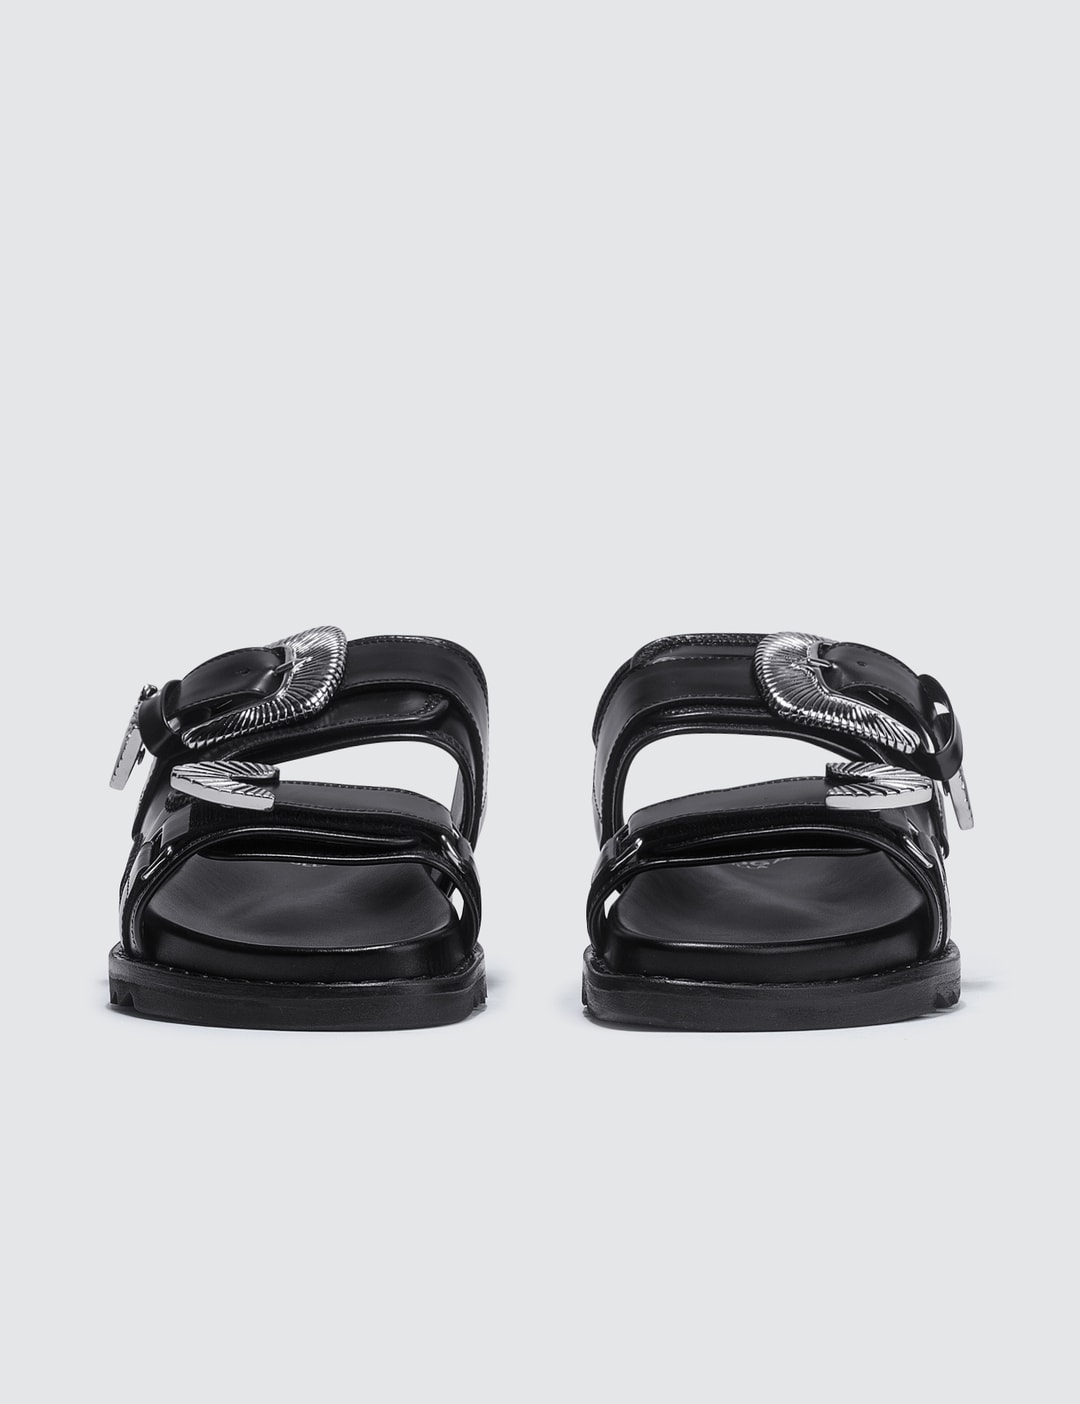 Toga Pulla - Strap Leather Sandals | HBX - Globally Curated Fashion and ...